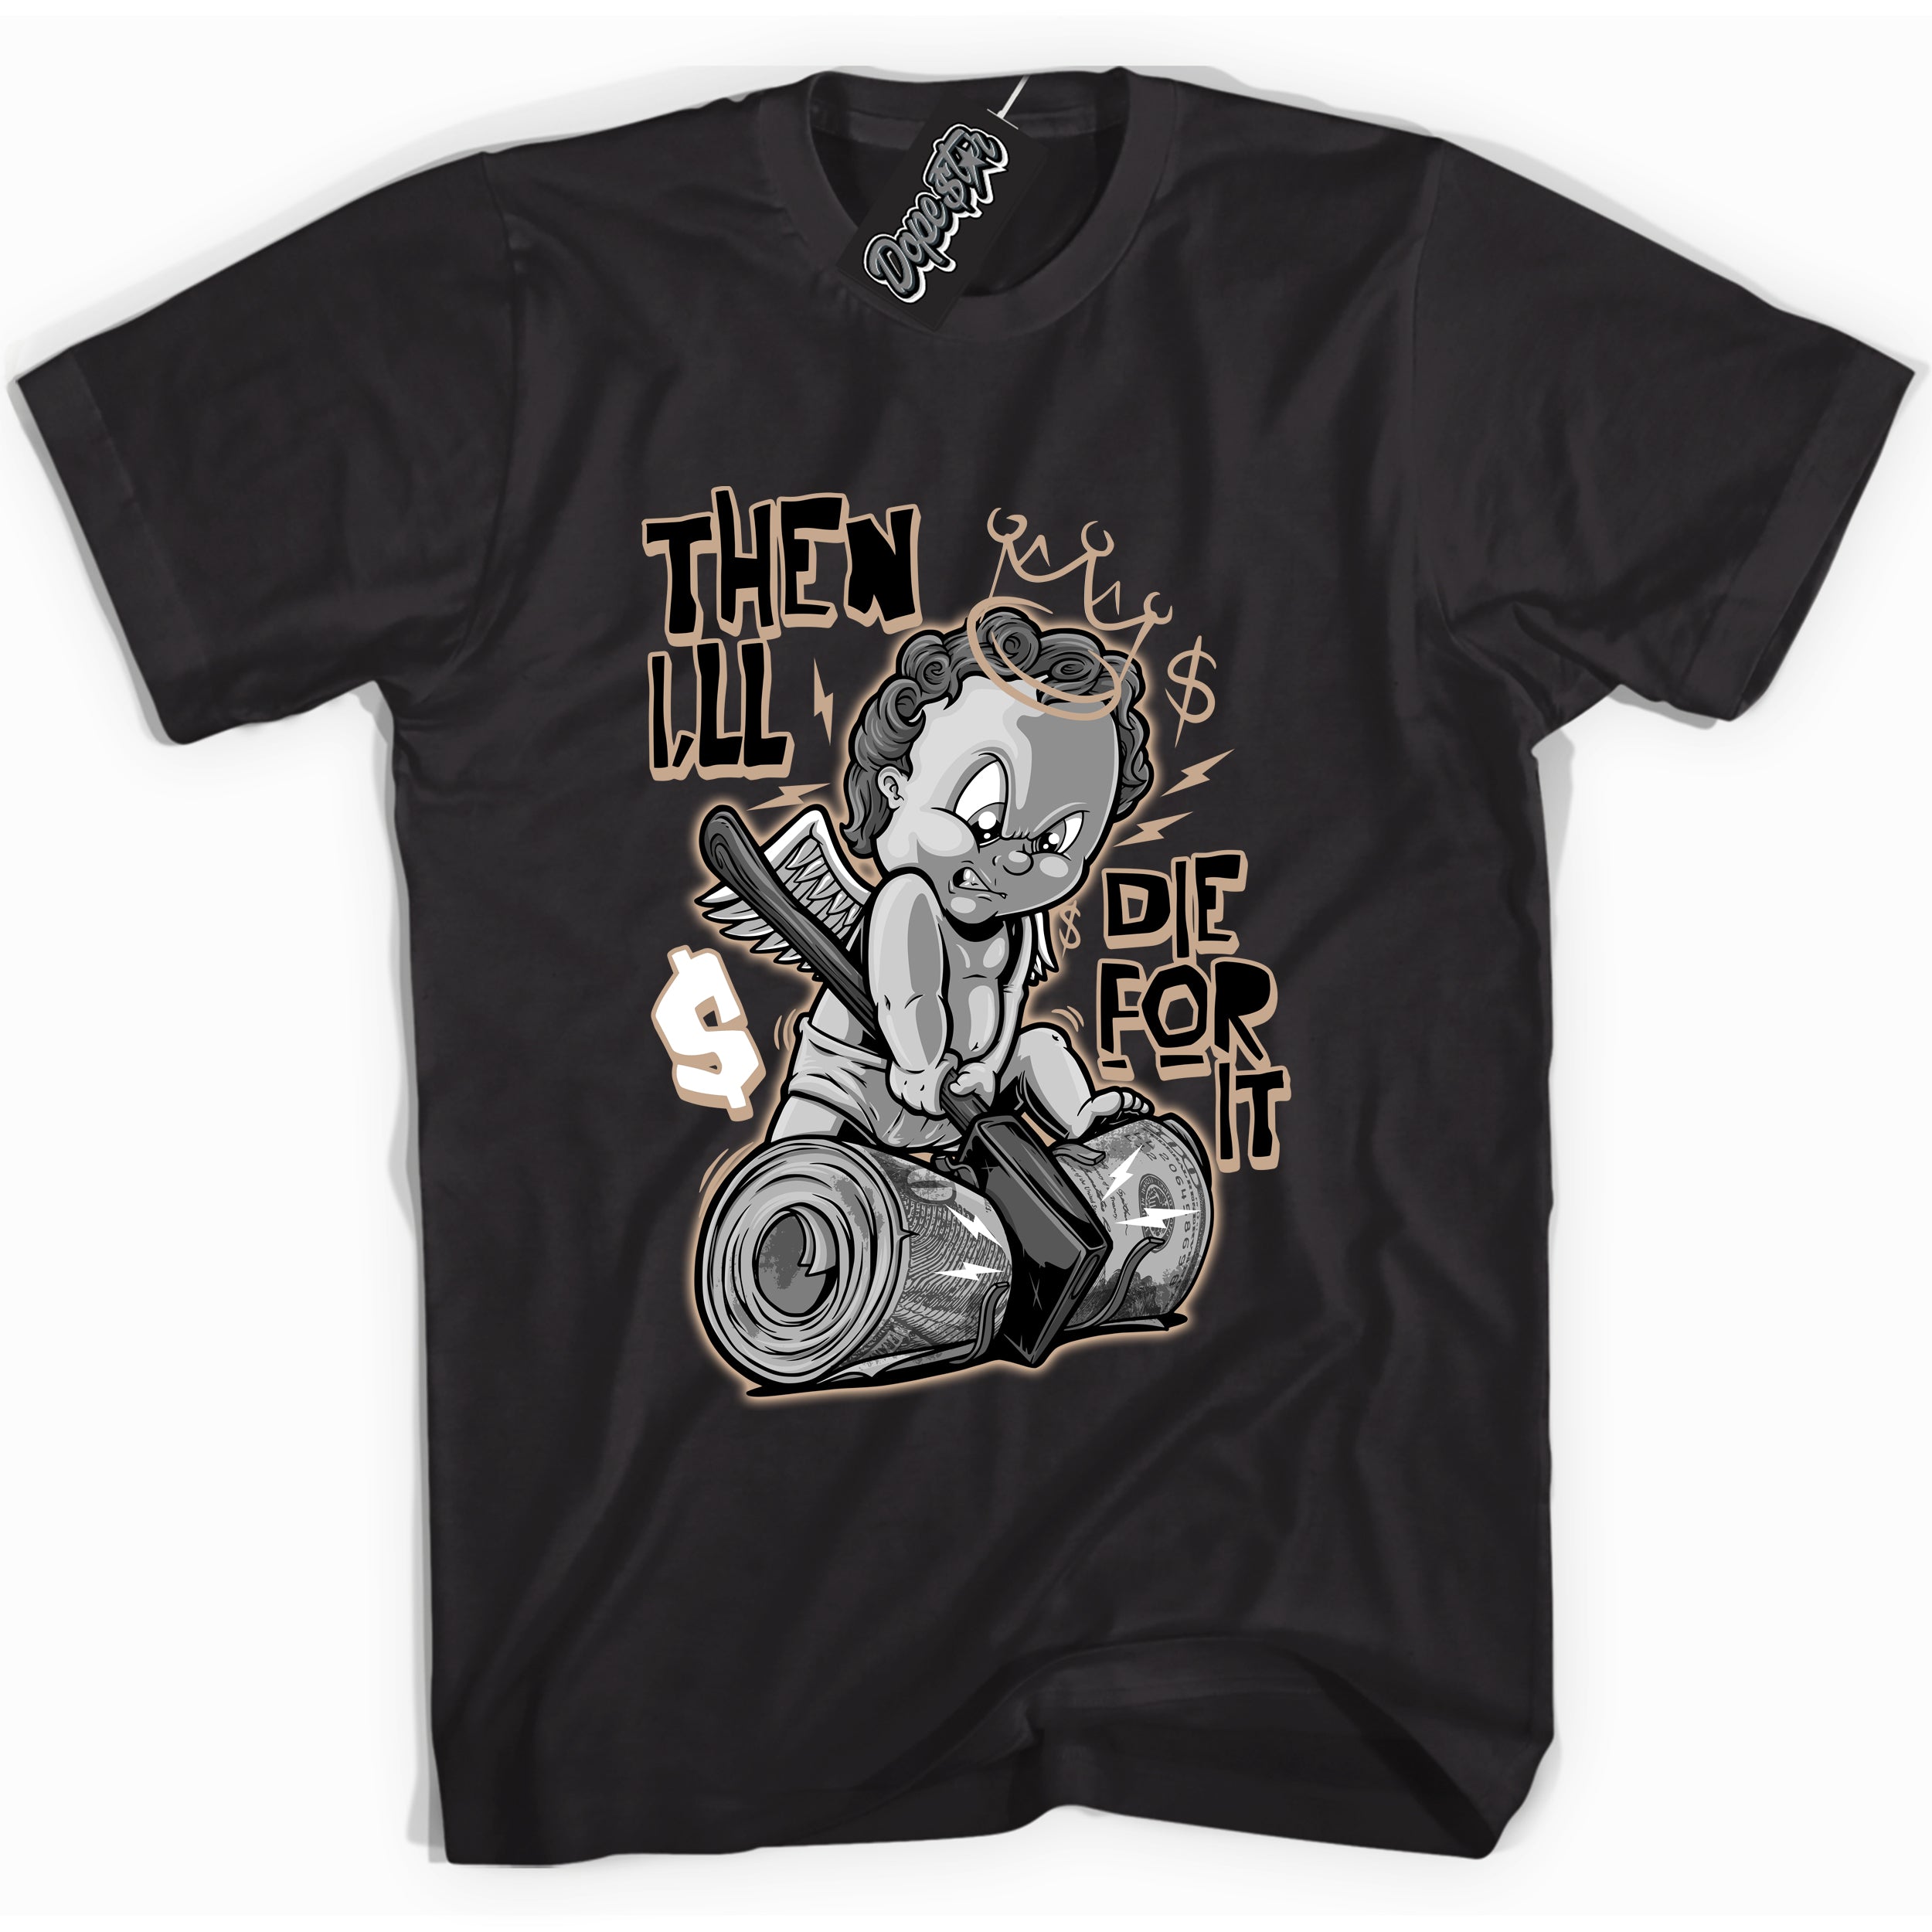 Cool Black graphic tee with “ Then I'll ” design, that perfectly matches Palomino 1s sneakers 